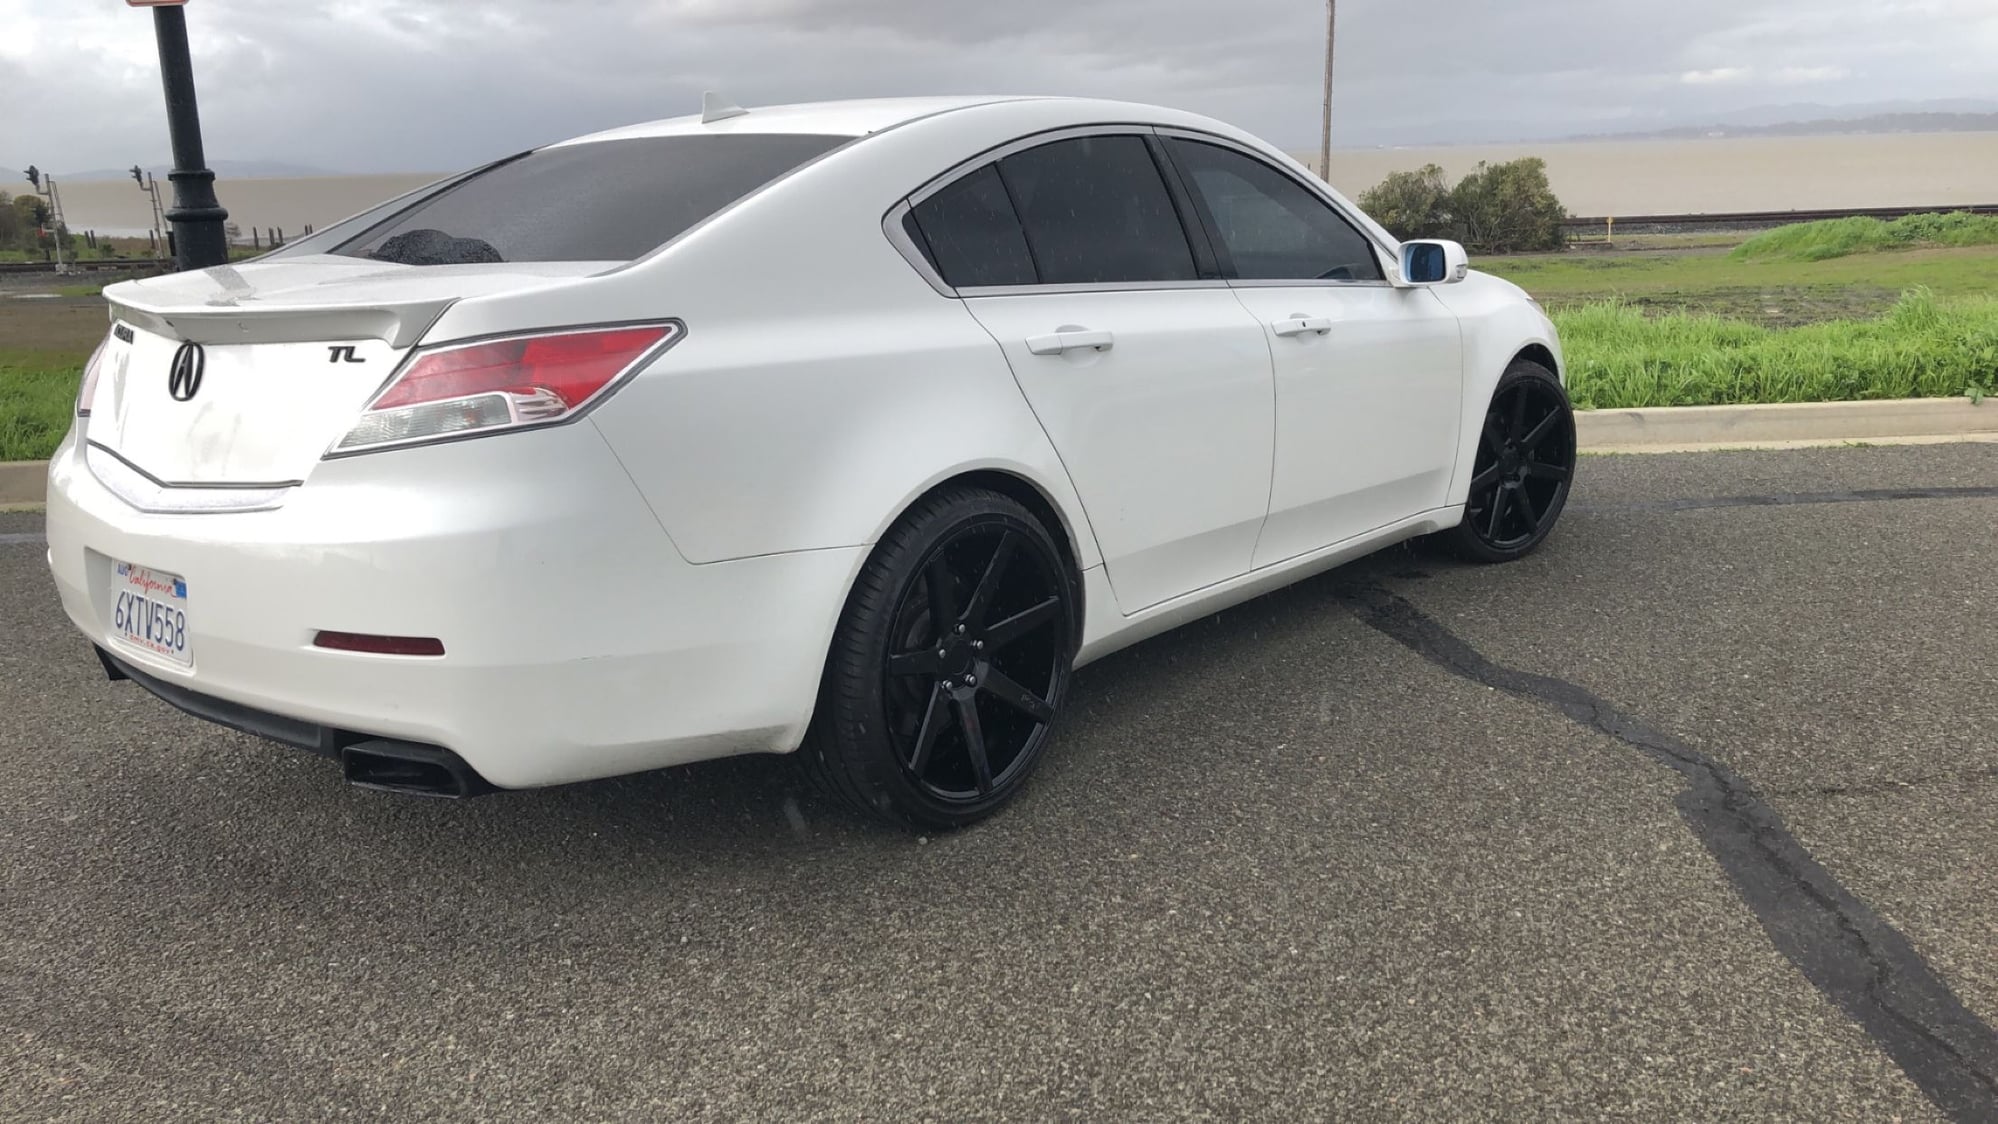 Wheels and Tires/Axles - FS: 20" Niche Wheels with new tires - POWDER COATED BLK! - New - 2009 to 2014 Acura TL - Walnut Creek, CA 94598, United States